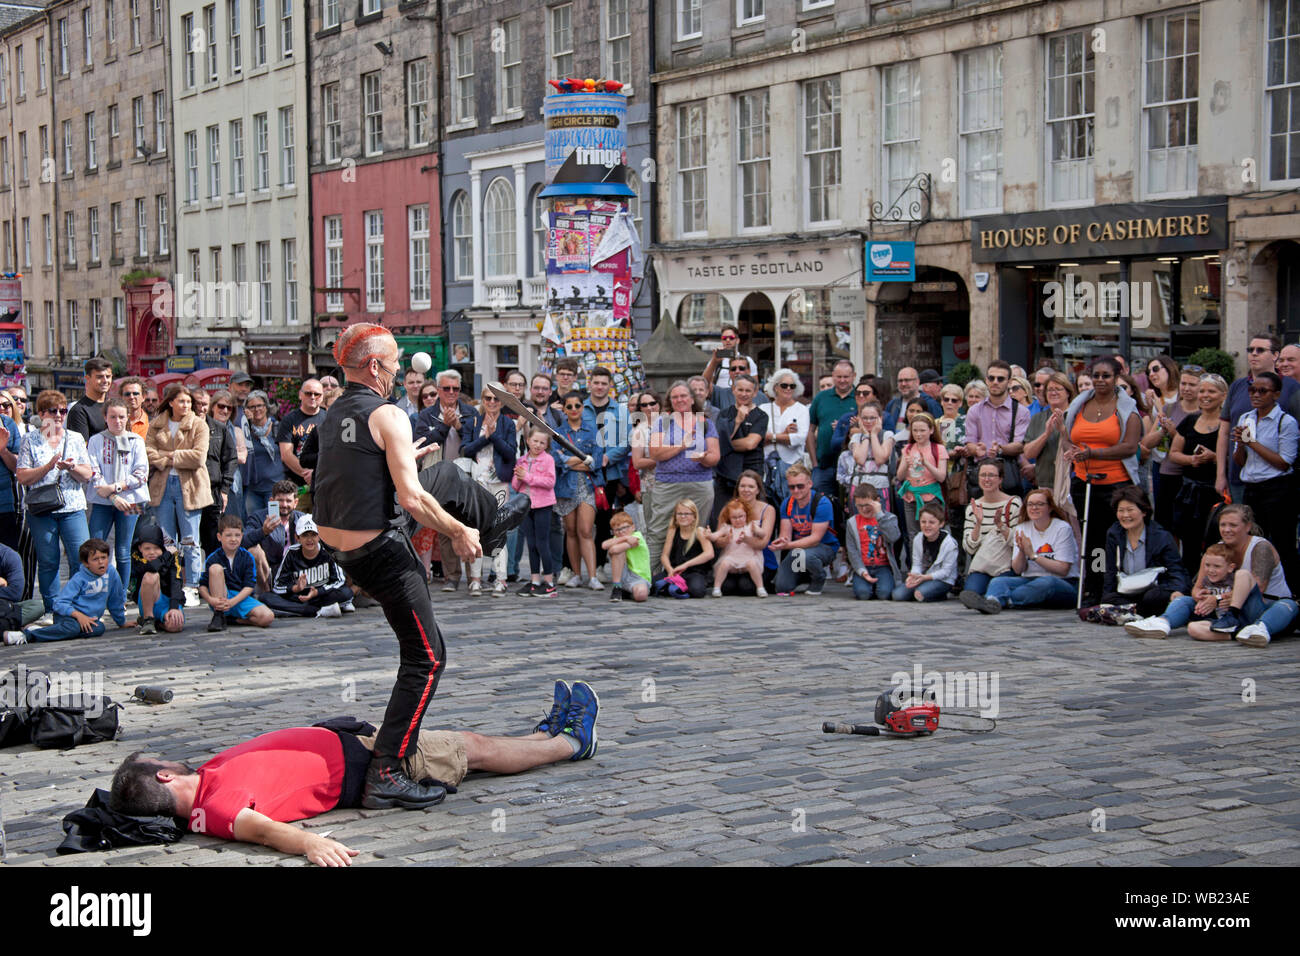 Royal Mile, Edinburgh, Scotland, UK. 23rd August 2019. The Mighty Gareth in his 32nd year at the Fringe entertains the audience with juggling ball and knives. Stock Photo